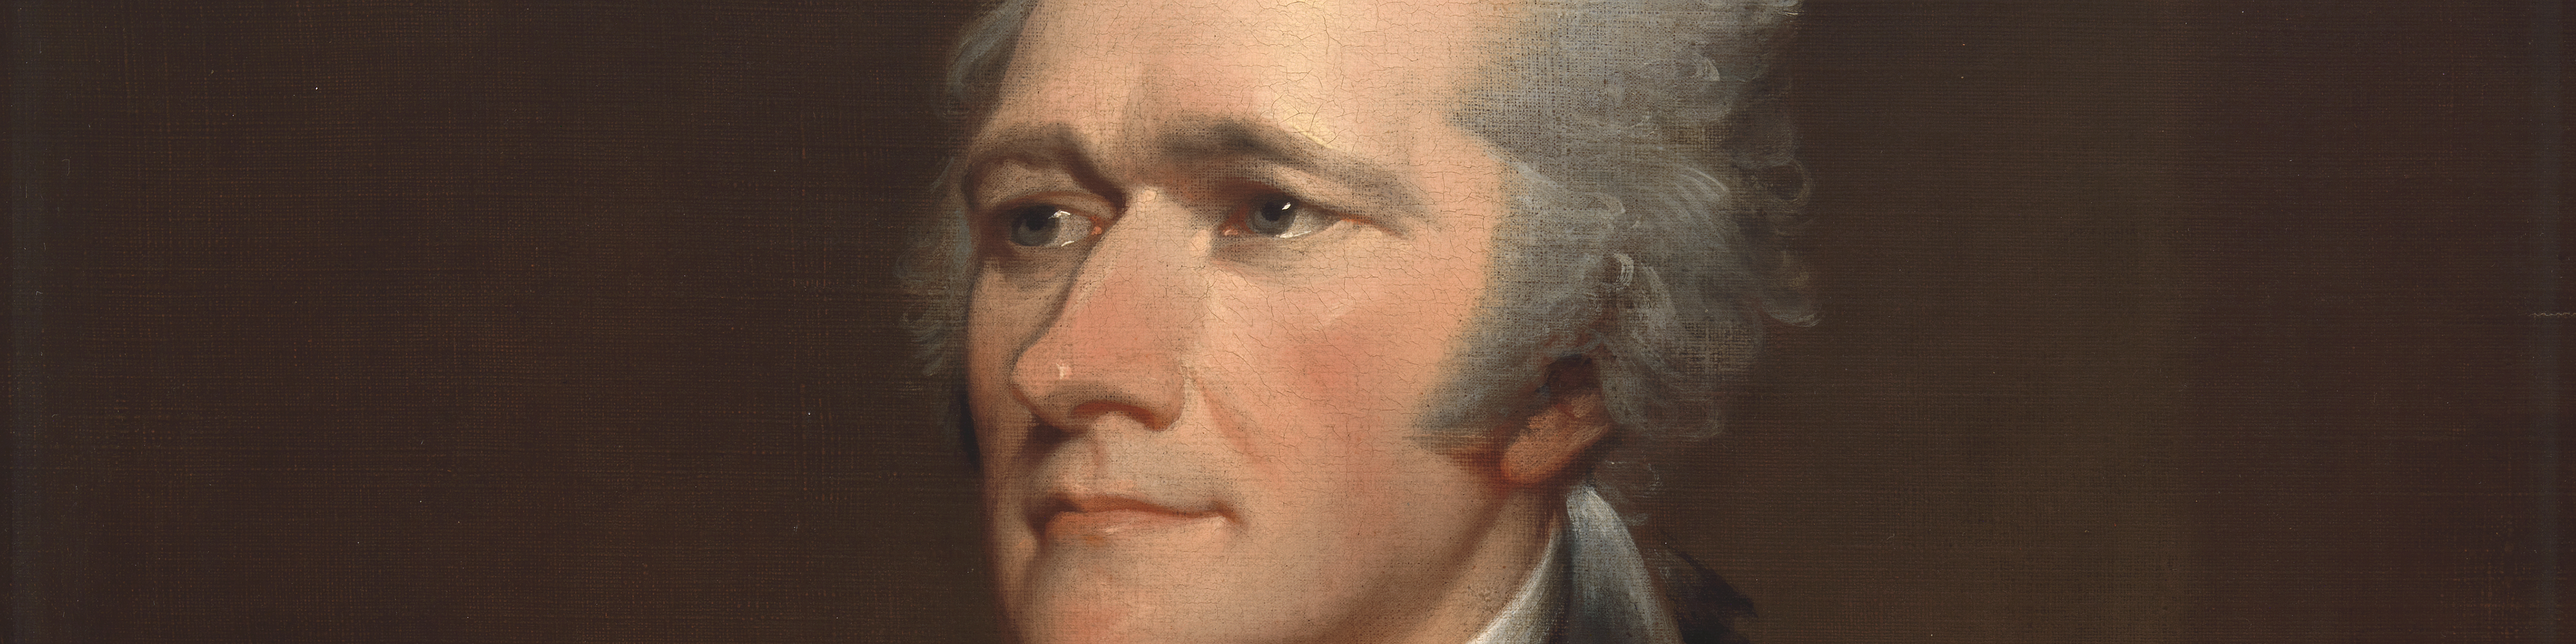 detail of a portrait of alexander hamilton showing him from the mid-forehead to top of his chin